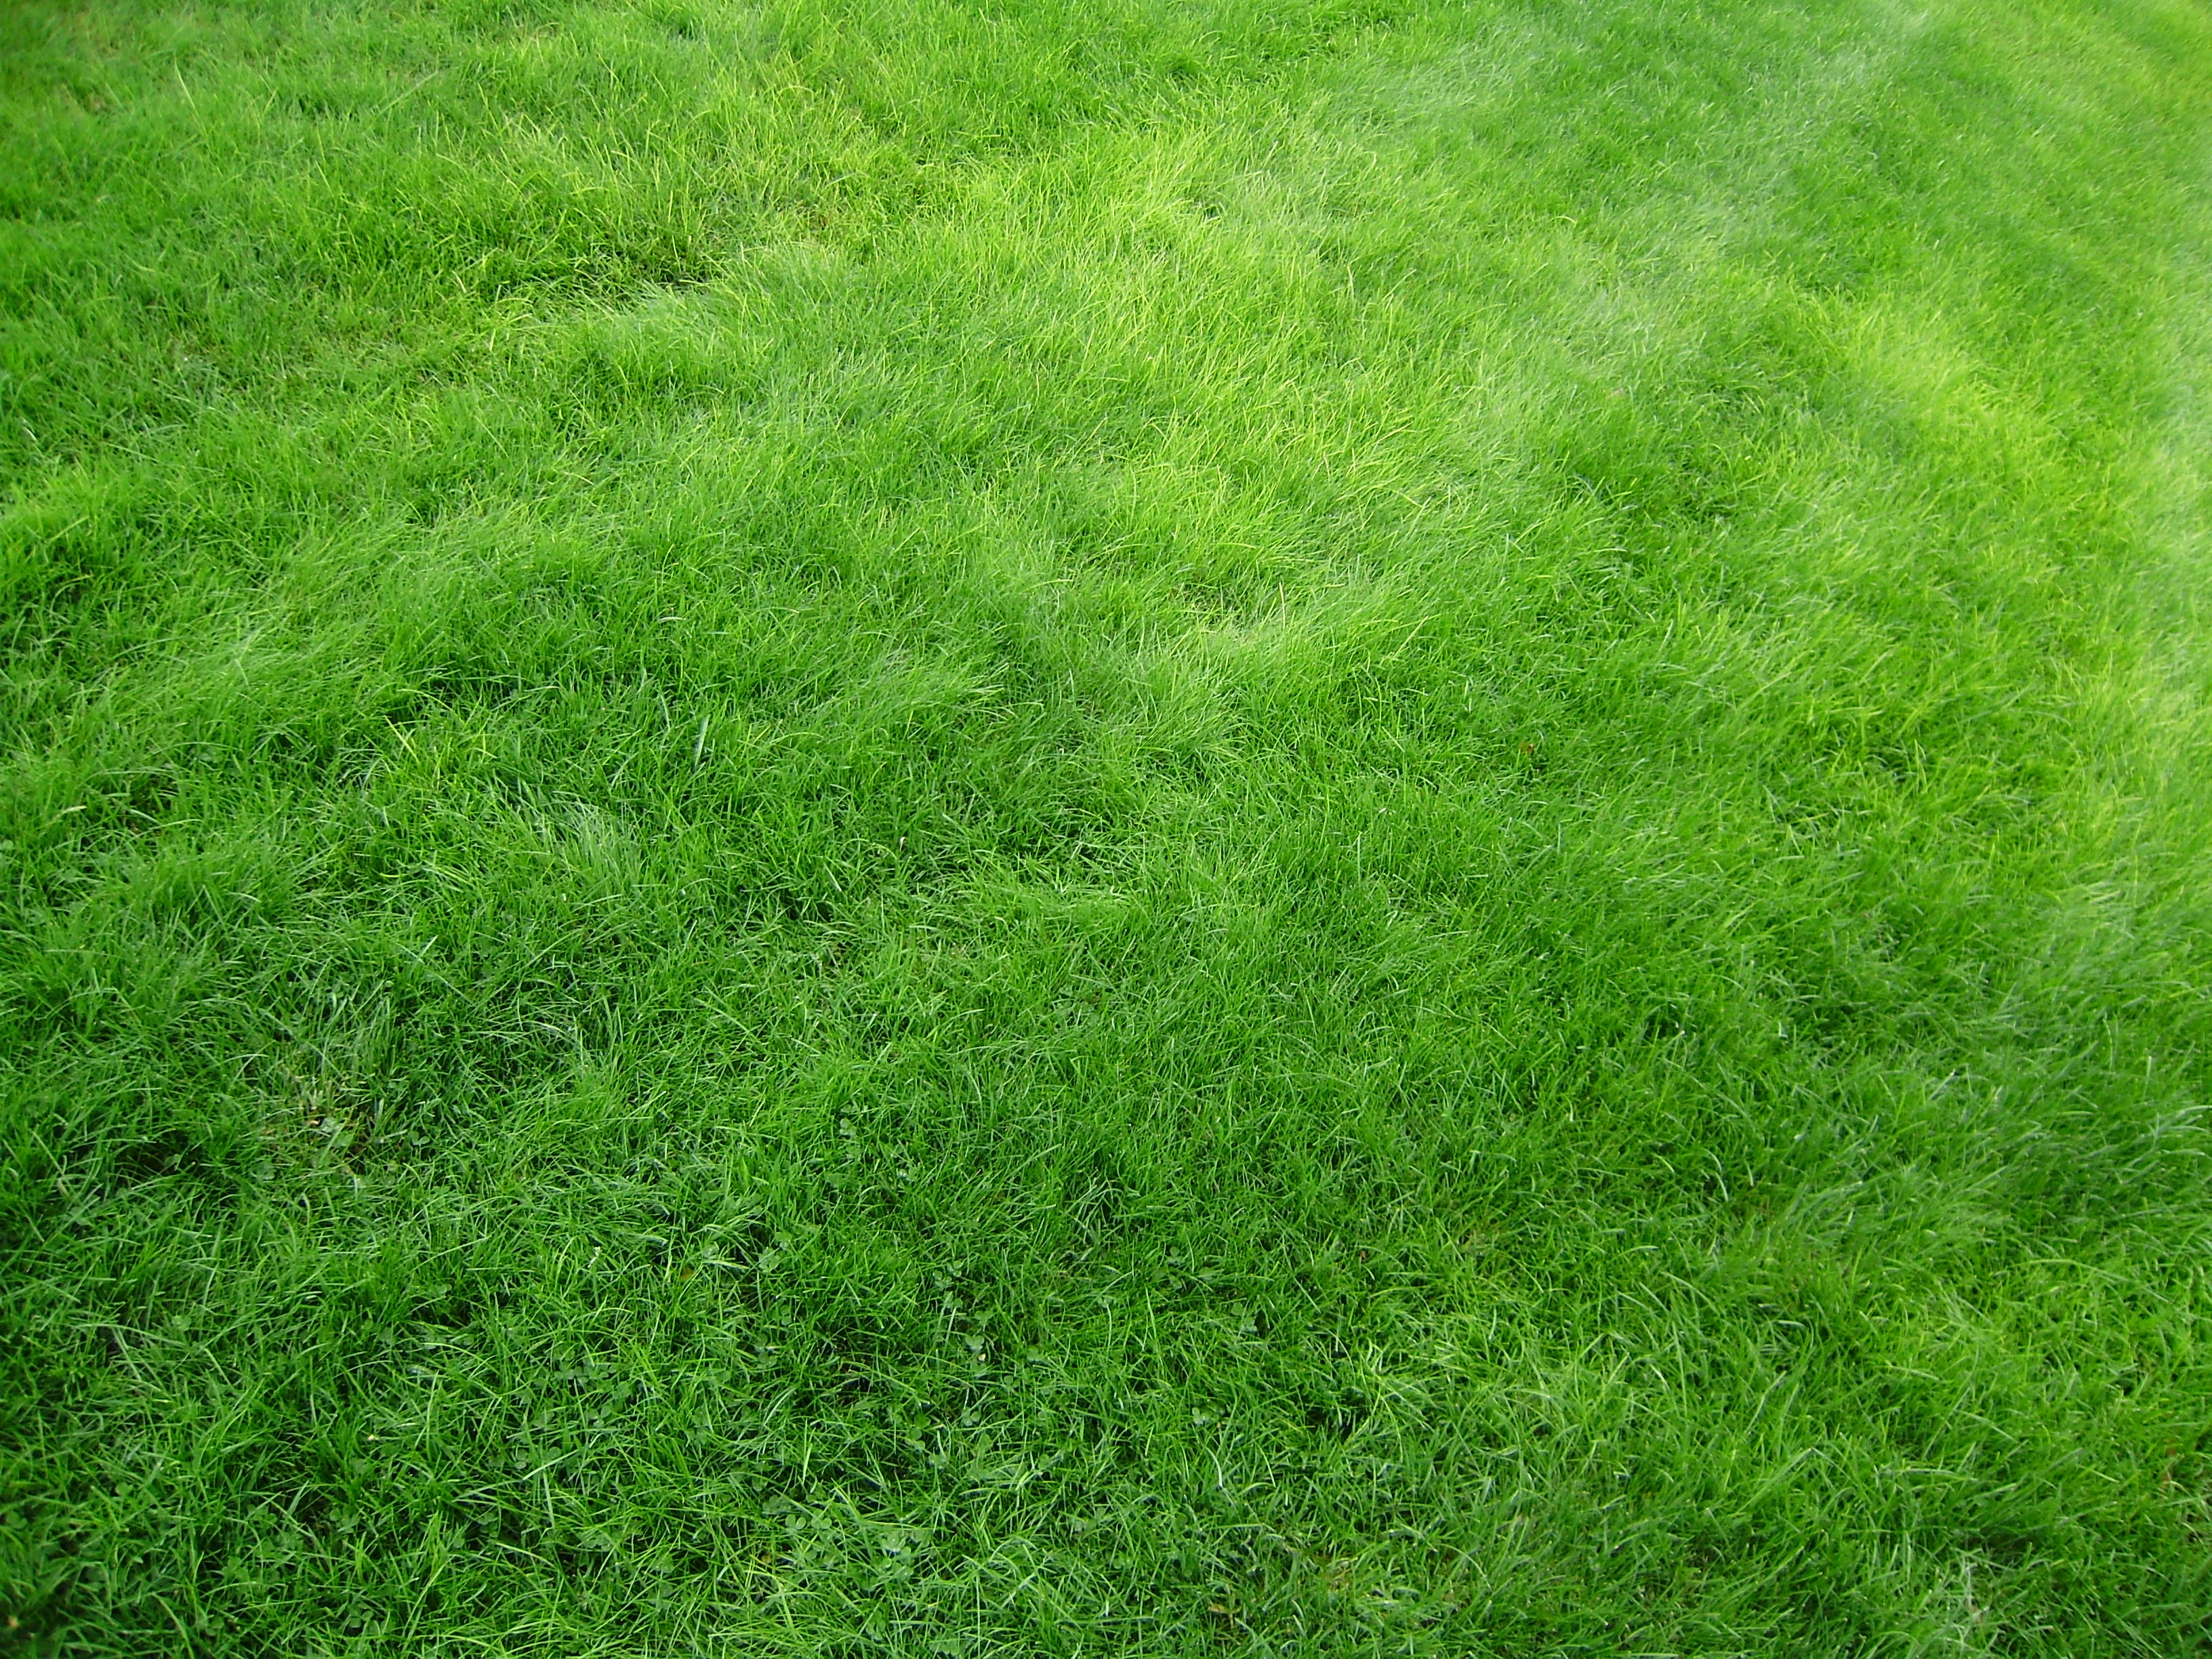 android grass, textures, lawn, green, texture, field